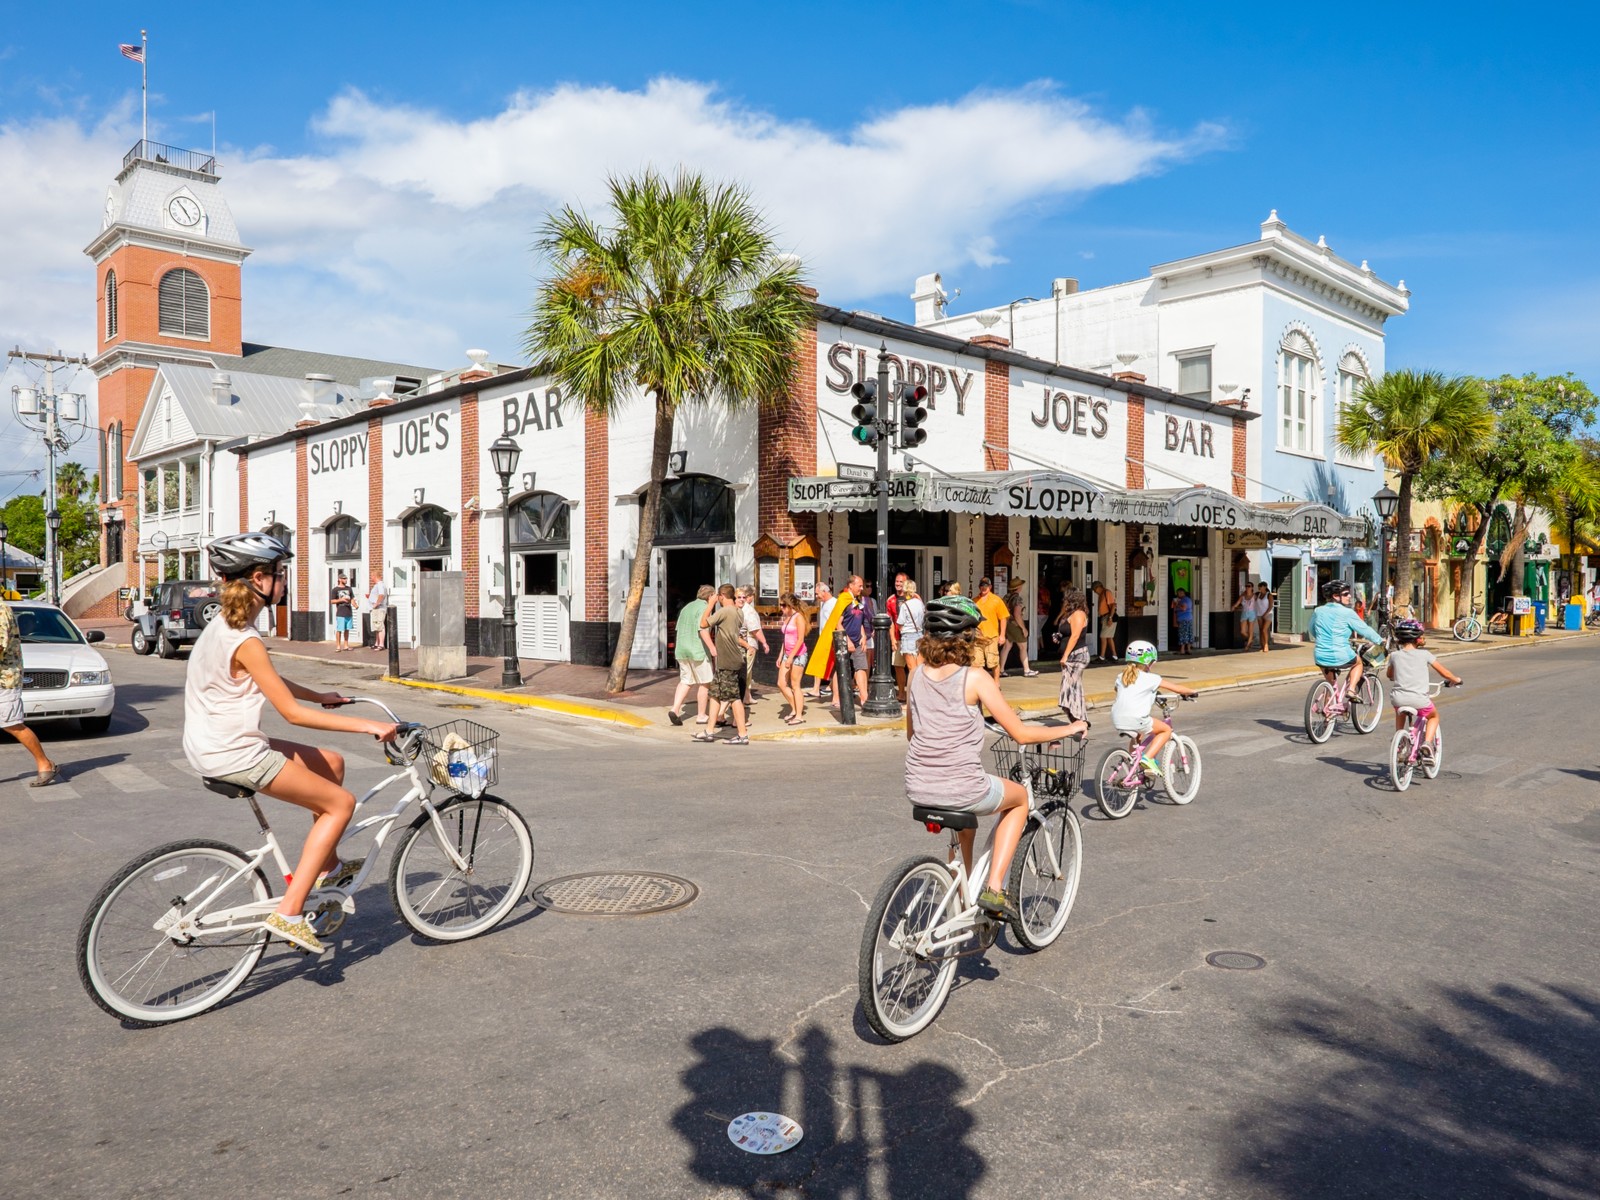 A family of five wearing helmets biking down the Duval Street and several people on the sidewalk beside Sloppy Joe's Bar, one of the best things to do in Key West